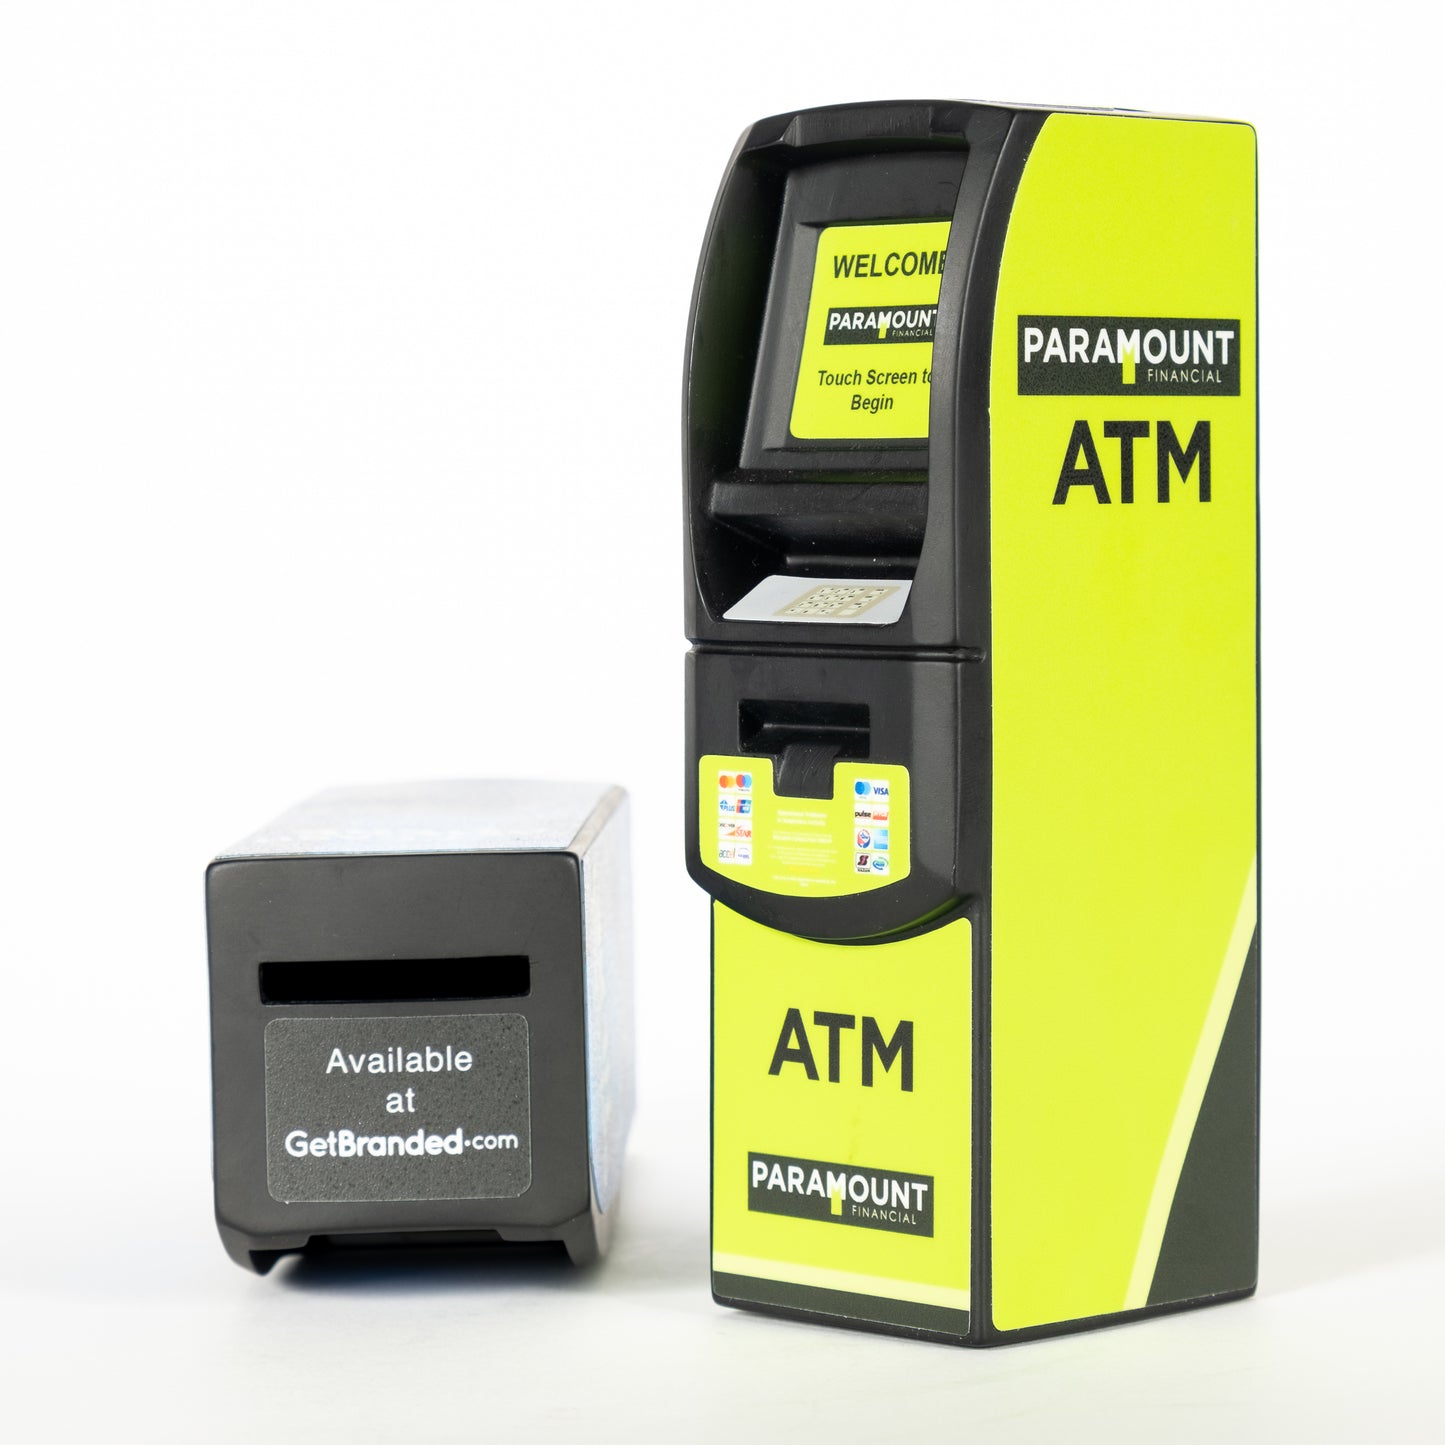 Isometric view of Genmega 6000 ATM Scale Model Coin Bank with custom Paramount ATM Company wrap, showcasing the top slot for easy deposit.